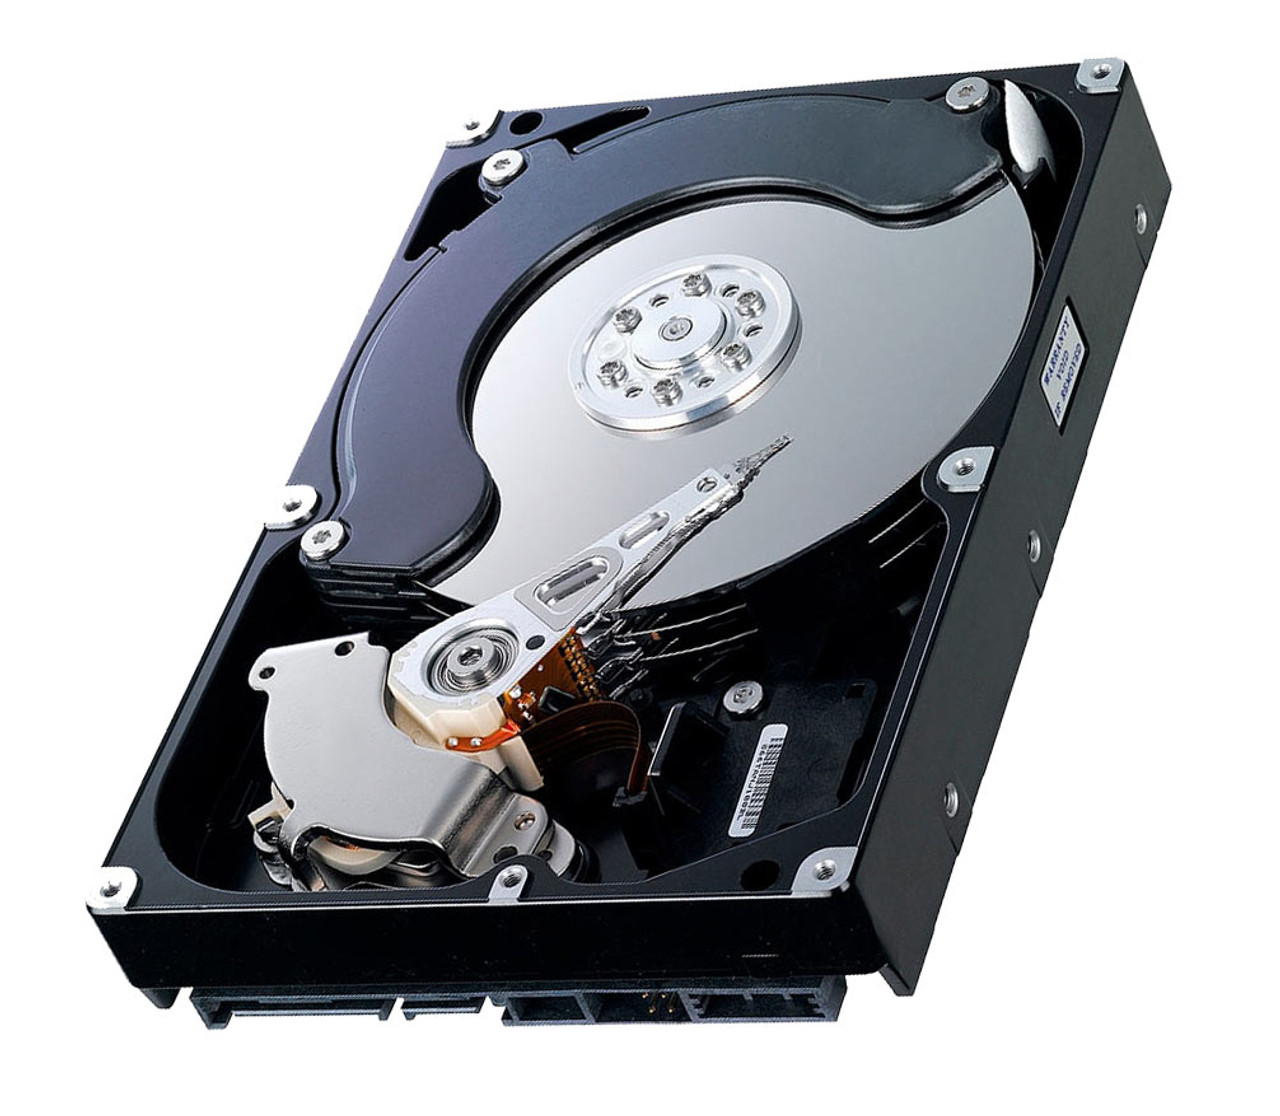 657750-B21 HP 1TB 7200RPM SATA 6Gbps Midline Hot Swap 3.5-inch Internal Hard Drive with Smart Carrier